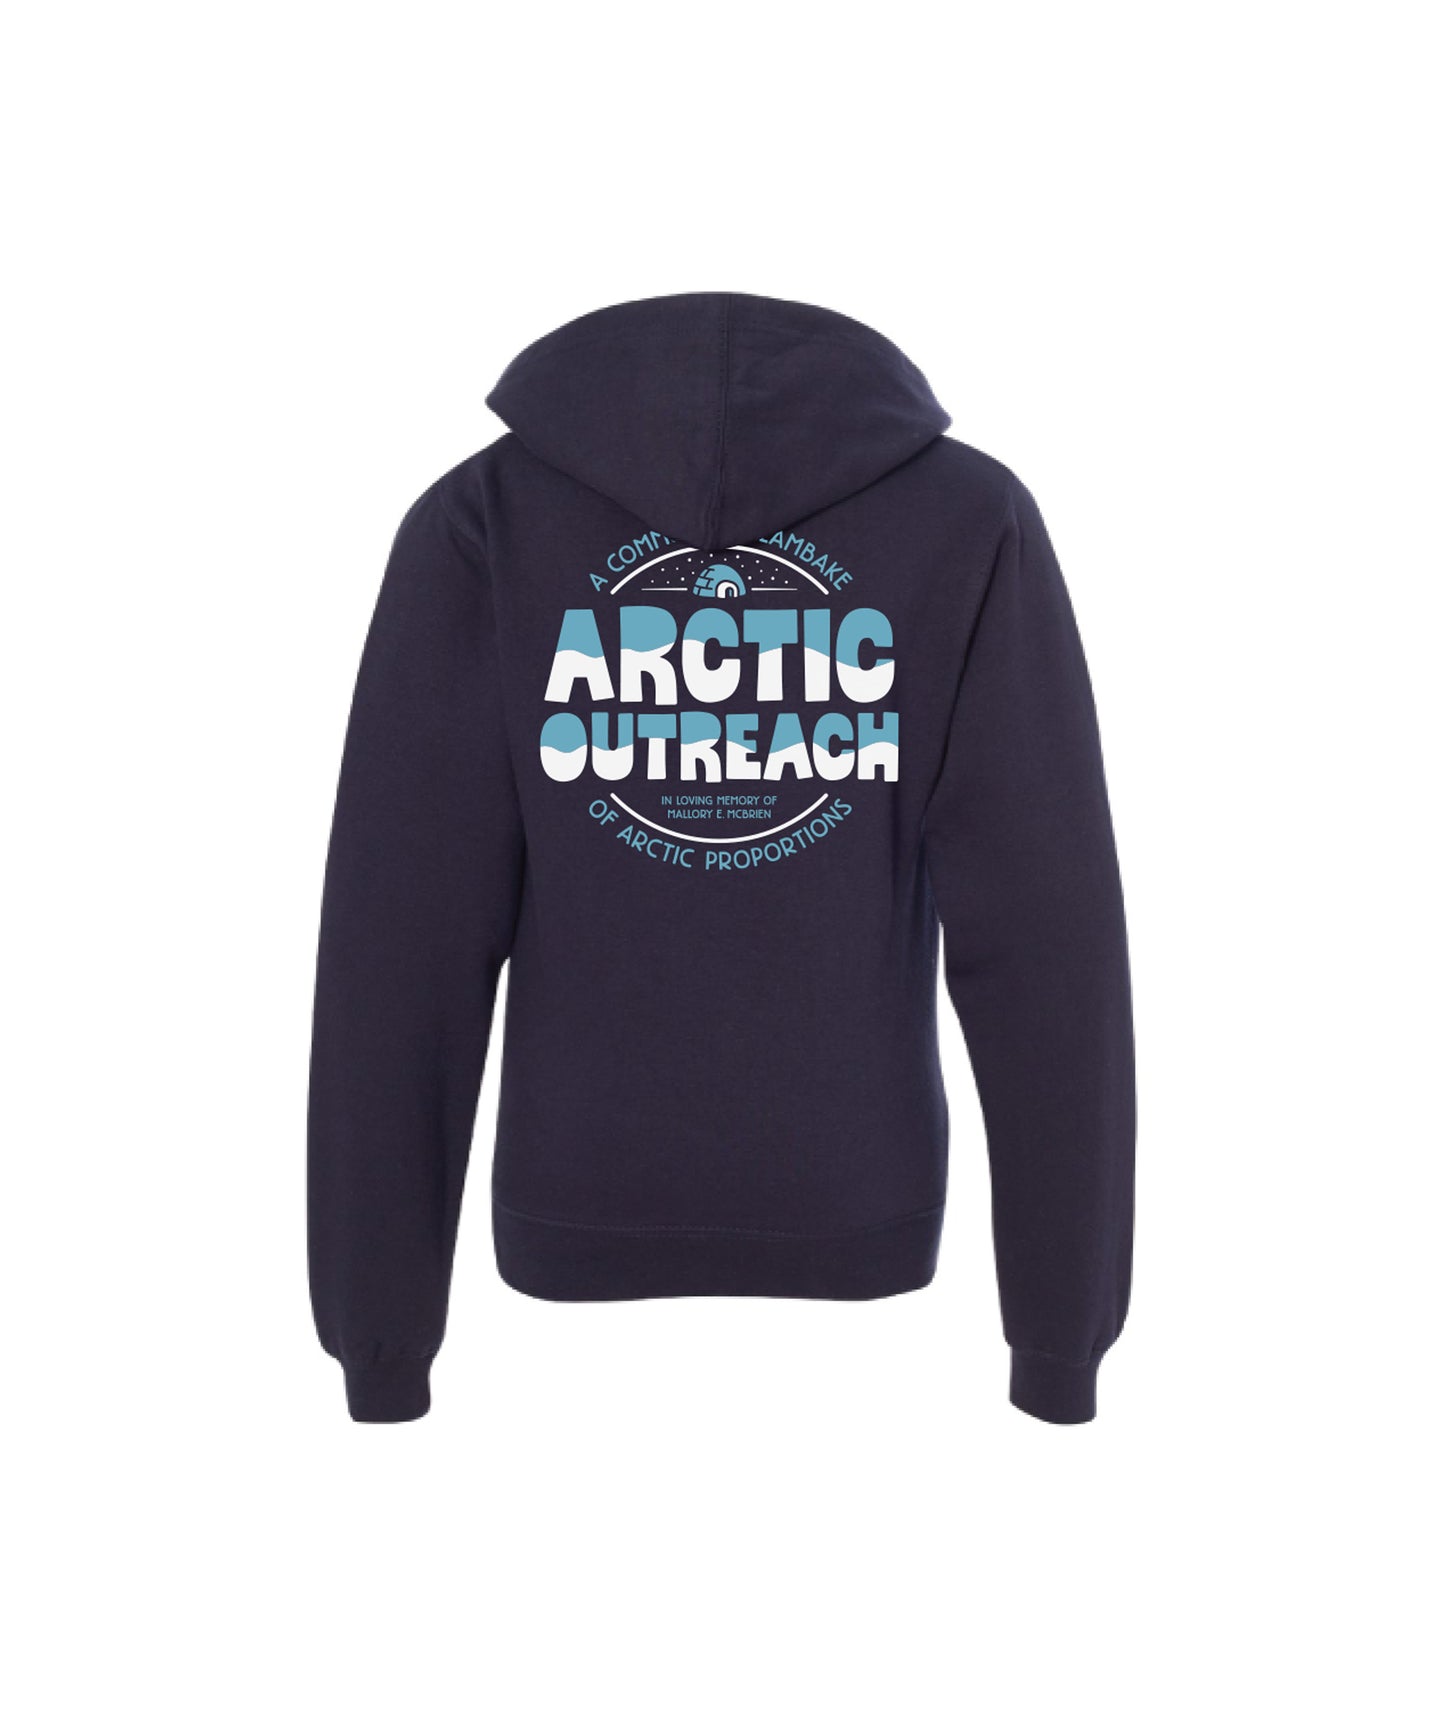 Youth Arctic Outreach Hoodie - Navy